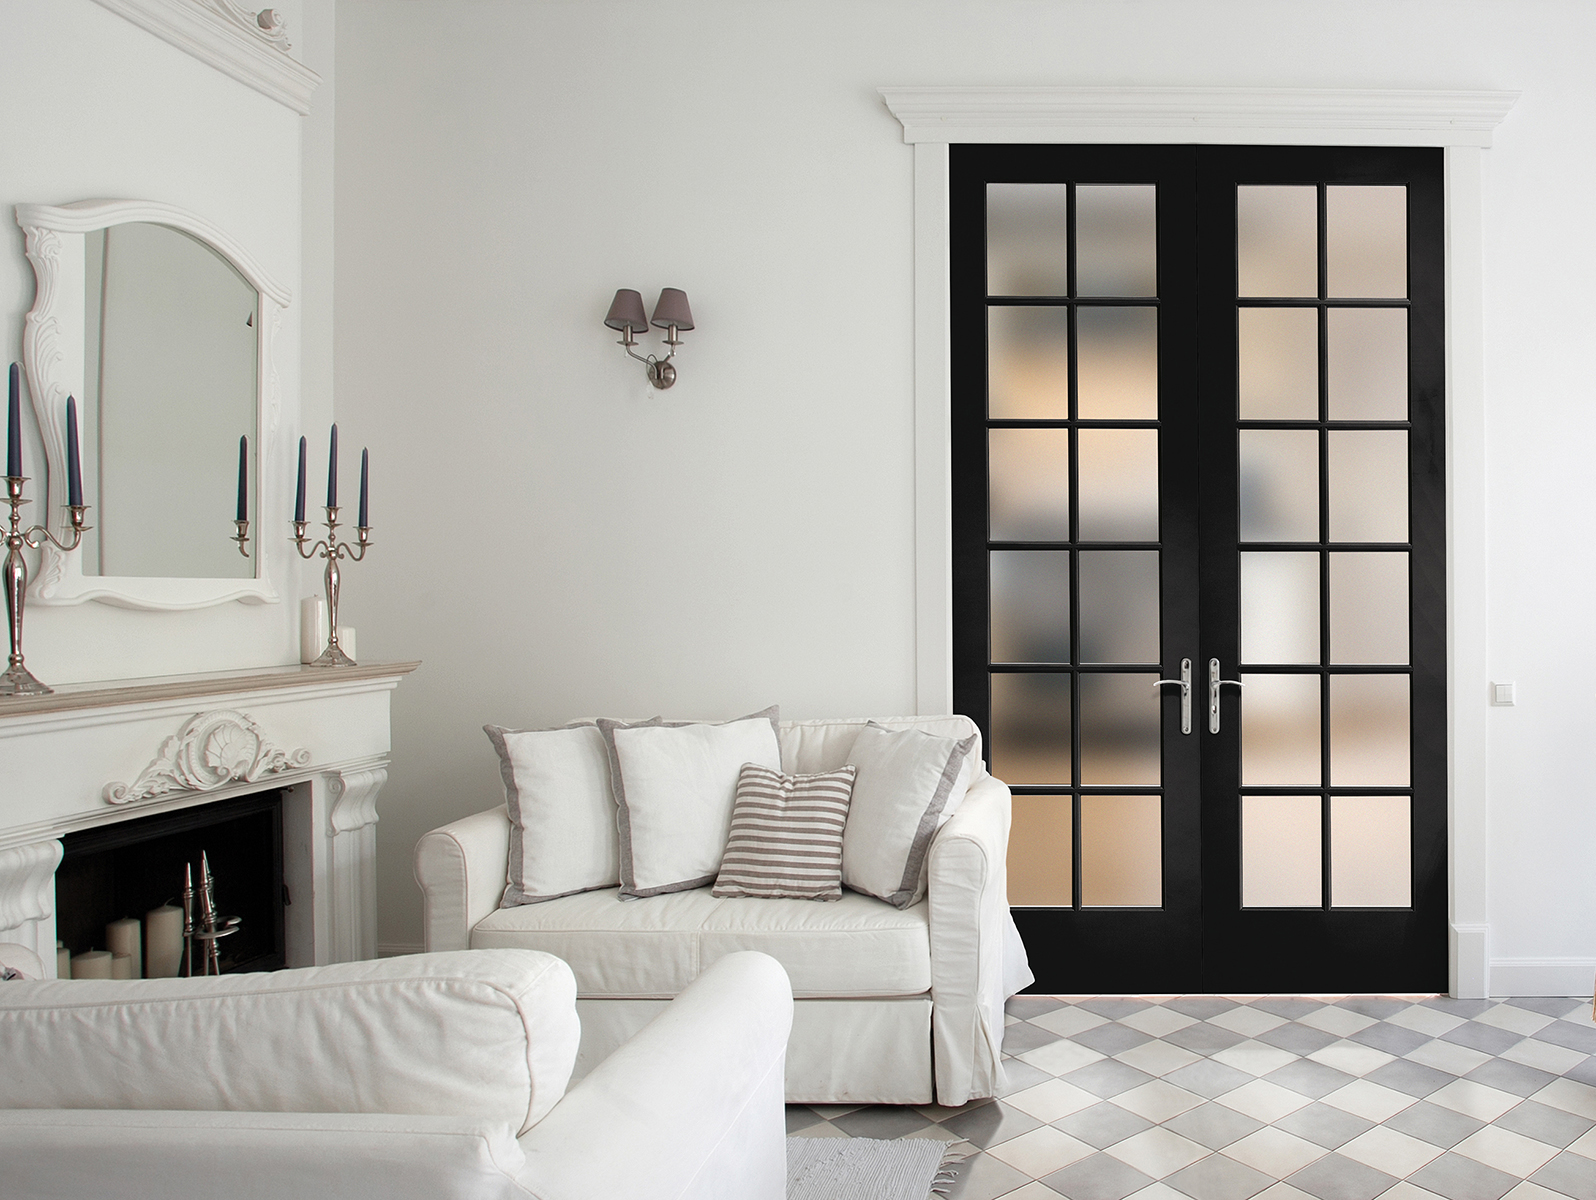 The interior of a modern sitting room with tile floors, a white fireplace and double French black doors with 12 equal lite glass panels in each